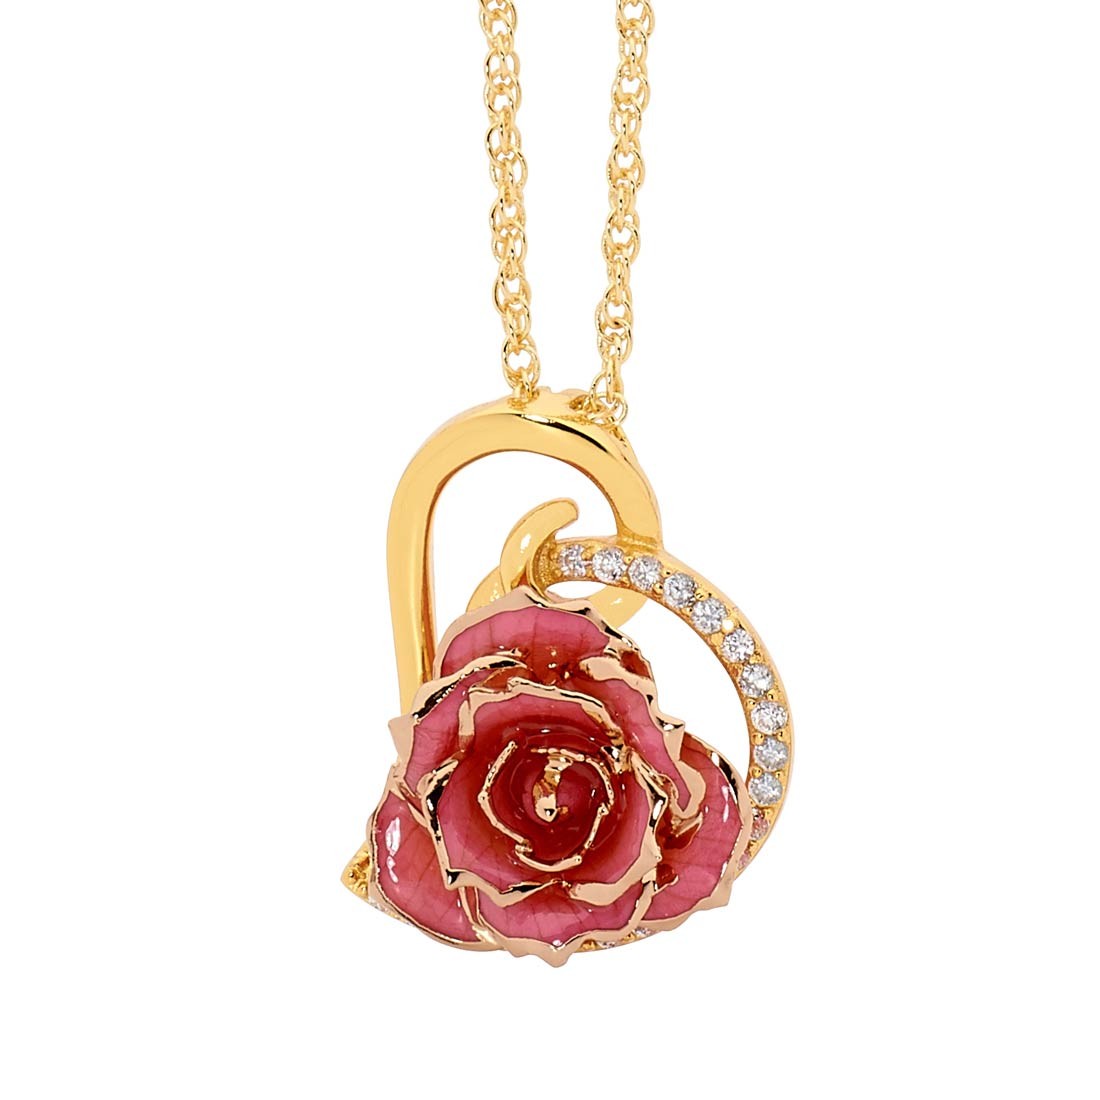 Gold Dipped Rose & Pink Matched Jewelry Set in Heart Theme